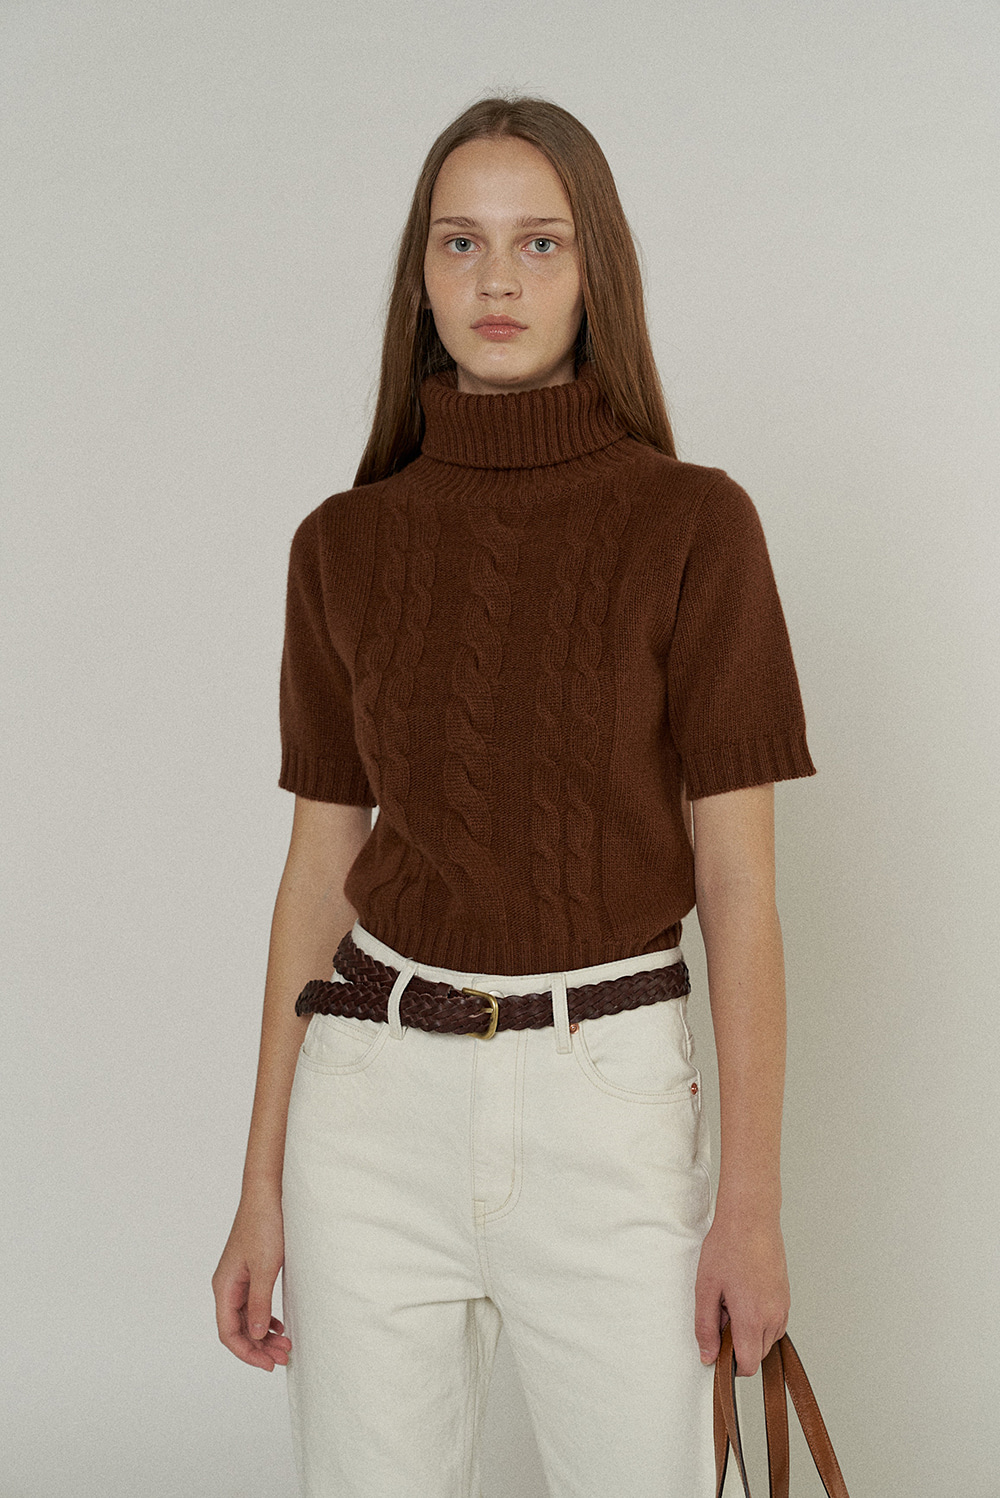 John Cable Sweater in Maple